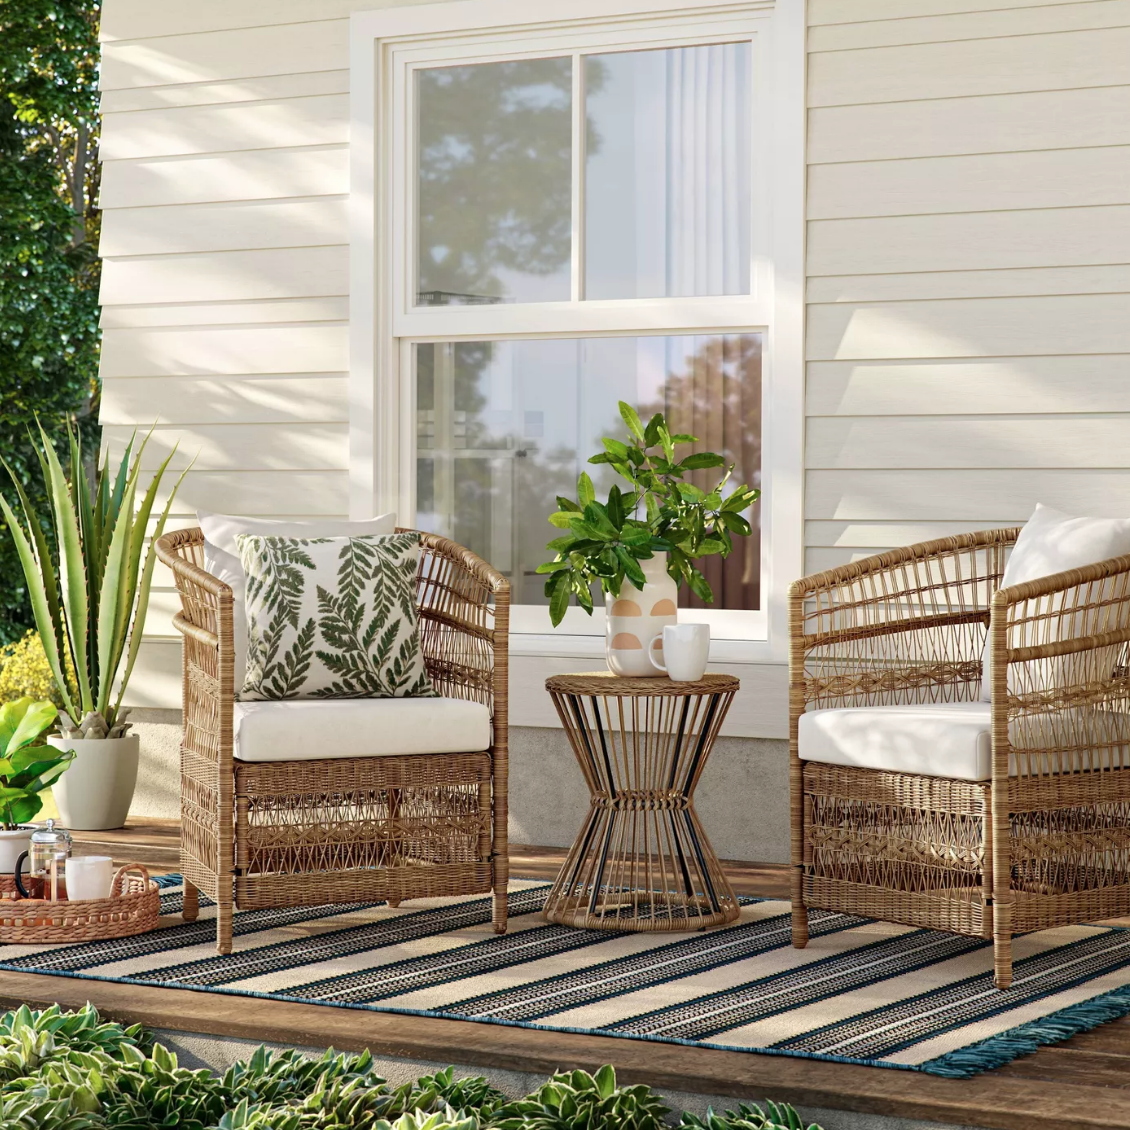 Mulberry Three Piece Patio Chat Set - $405